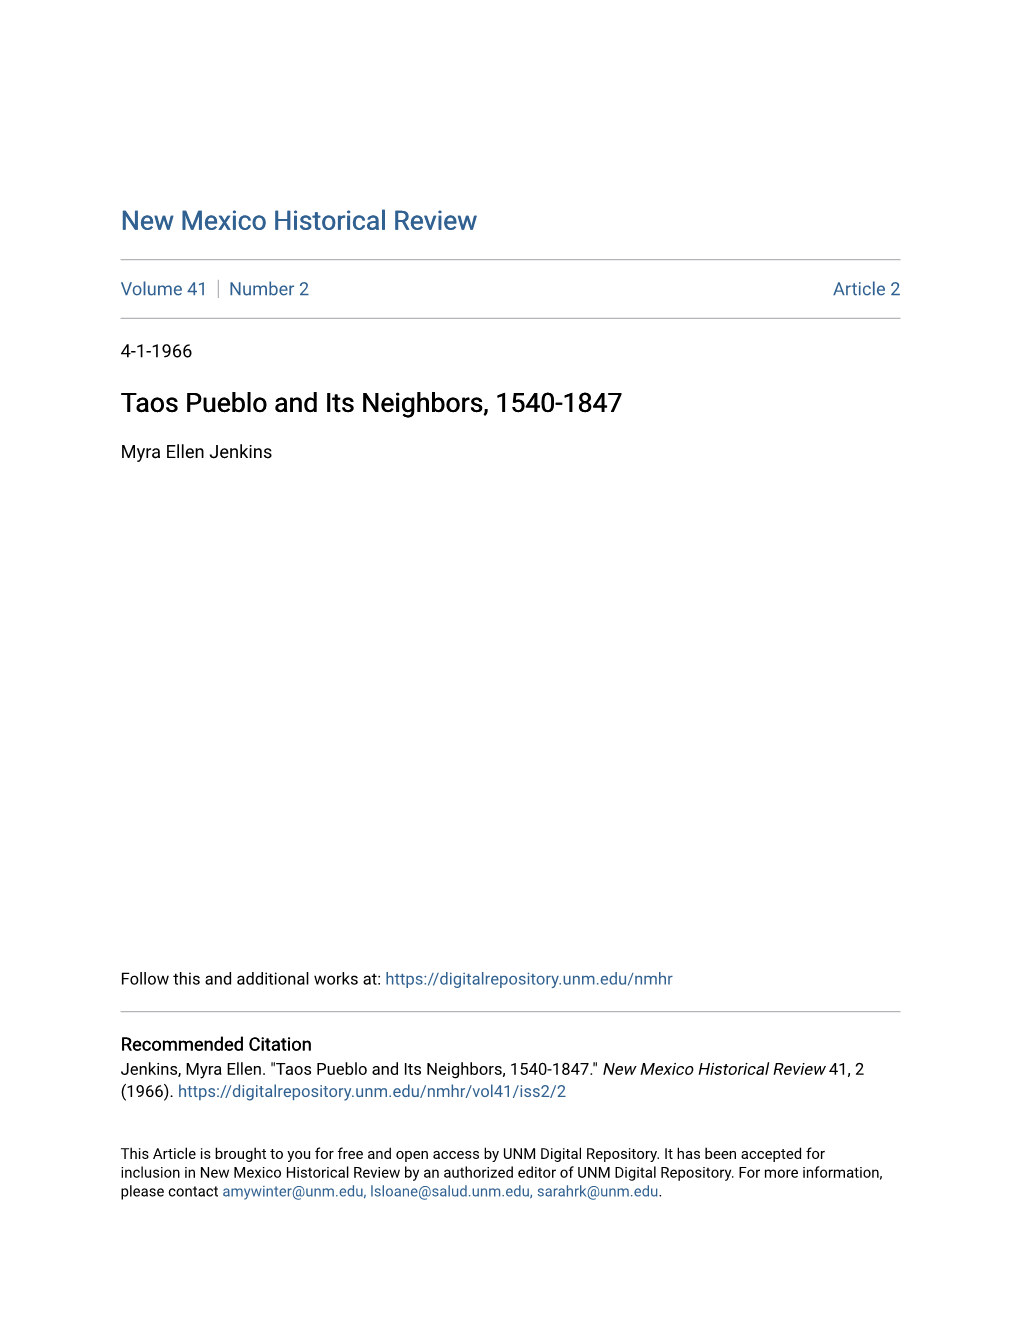 Taos Pueblo and Its Neighbors, 1540-1847